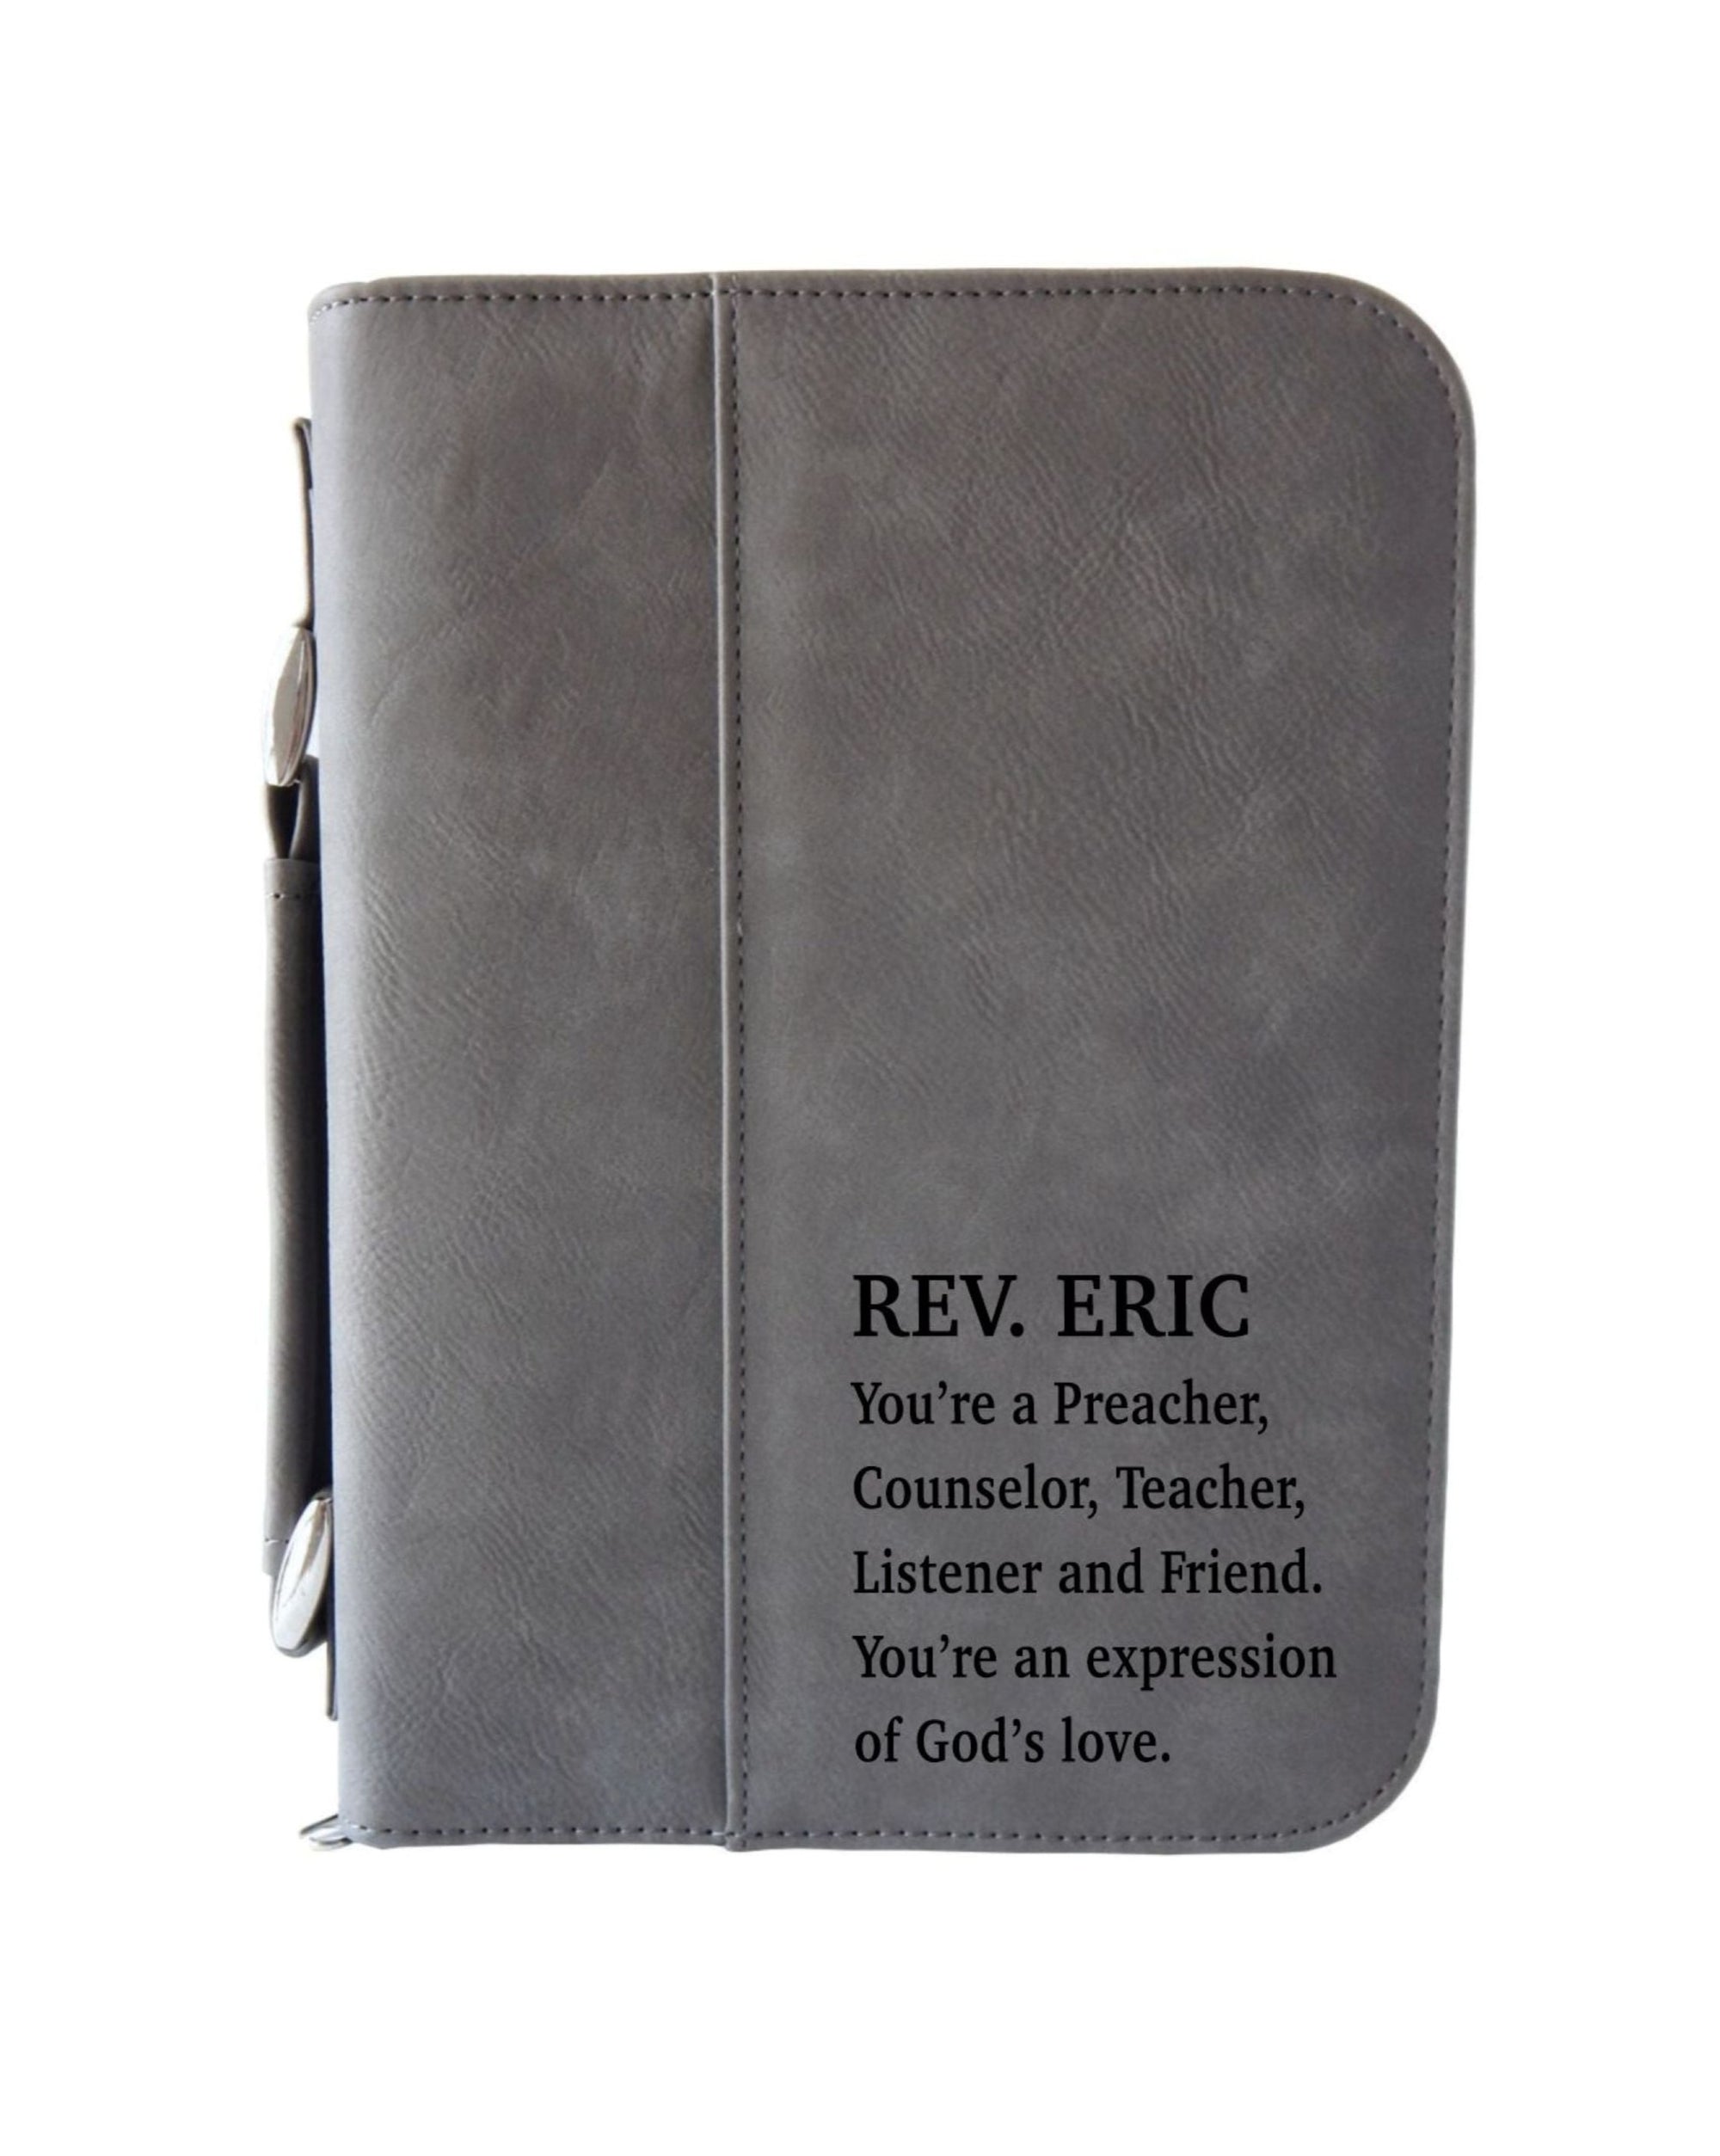 Personalized Bible Case | Leather Bible Cover | Engraved Father's Day Gift BCL024